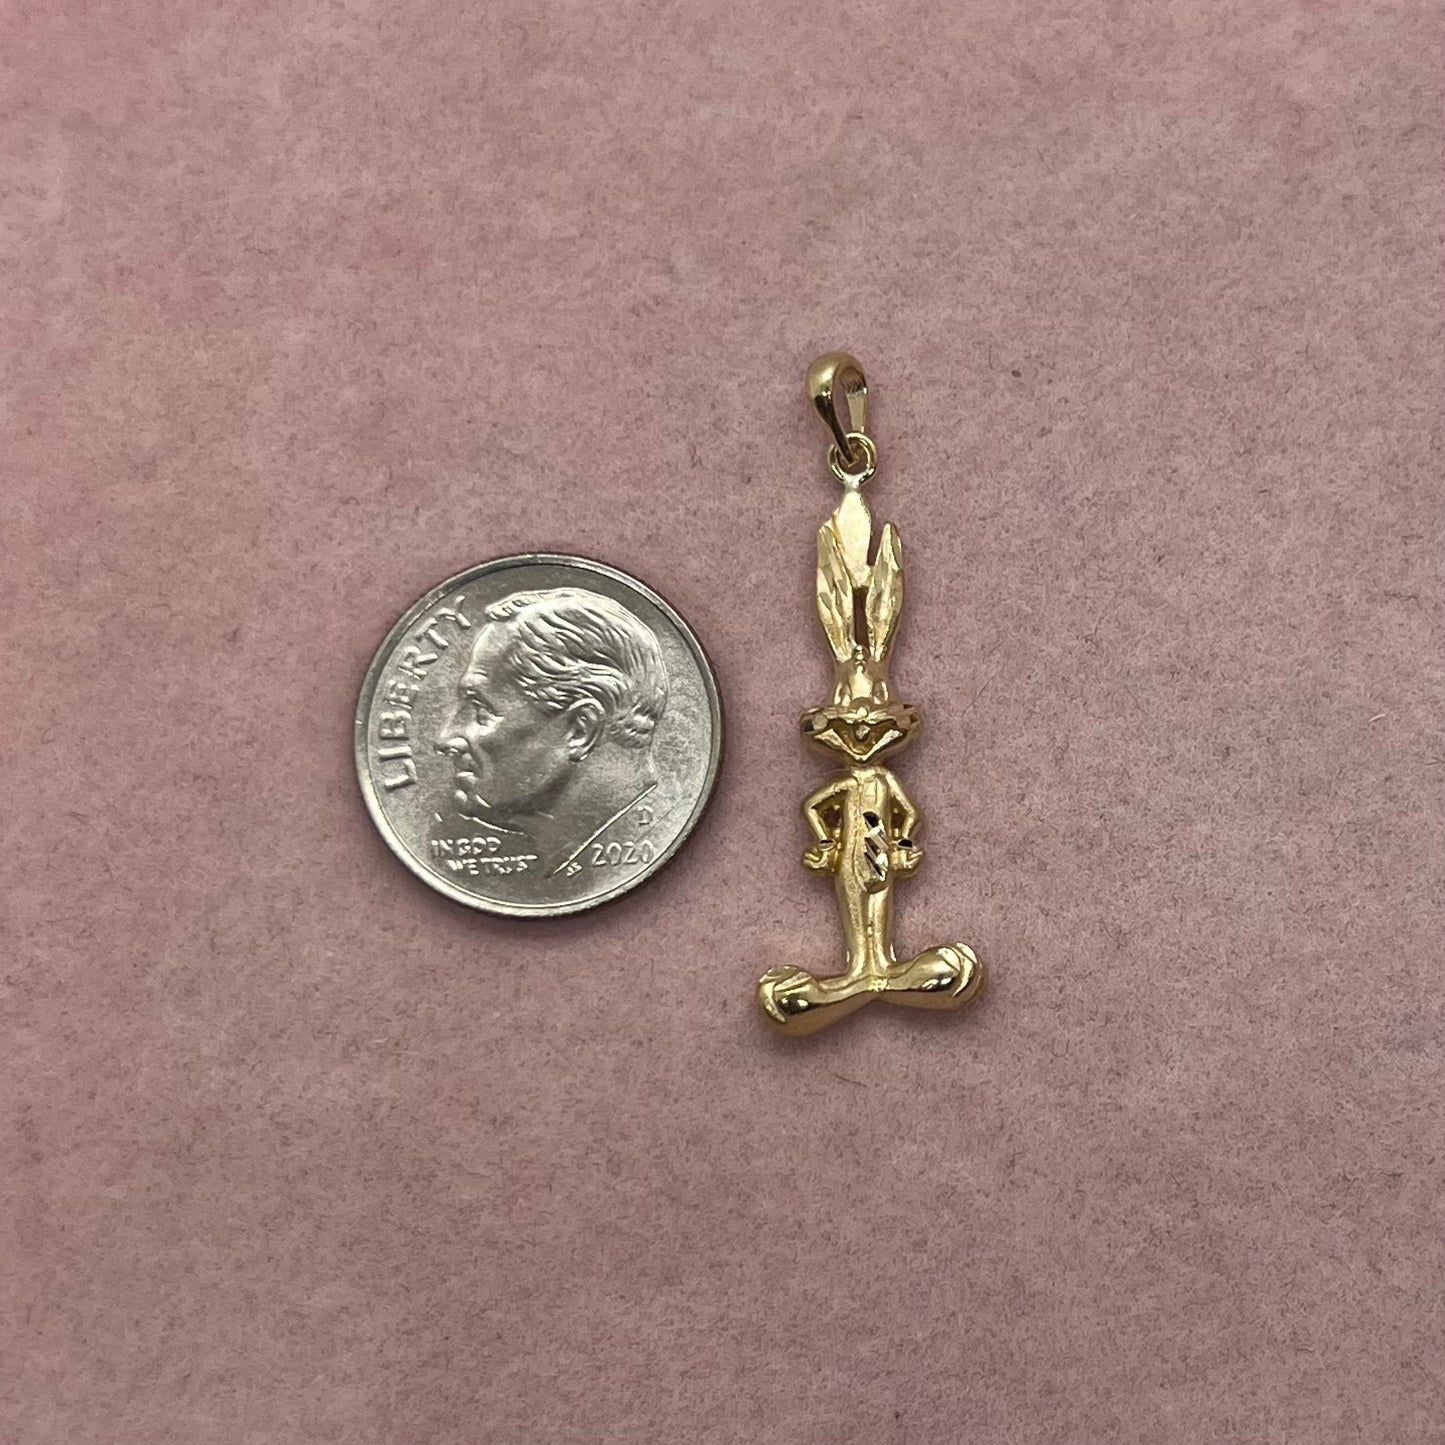 Bugs Bunny Charm by Michael Anthony